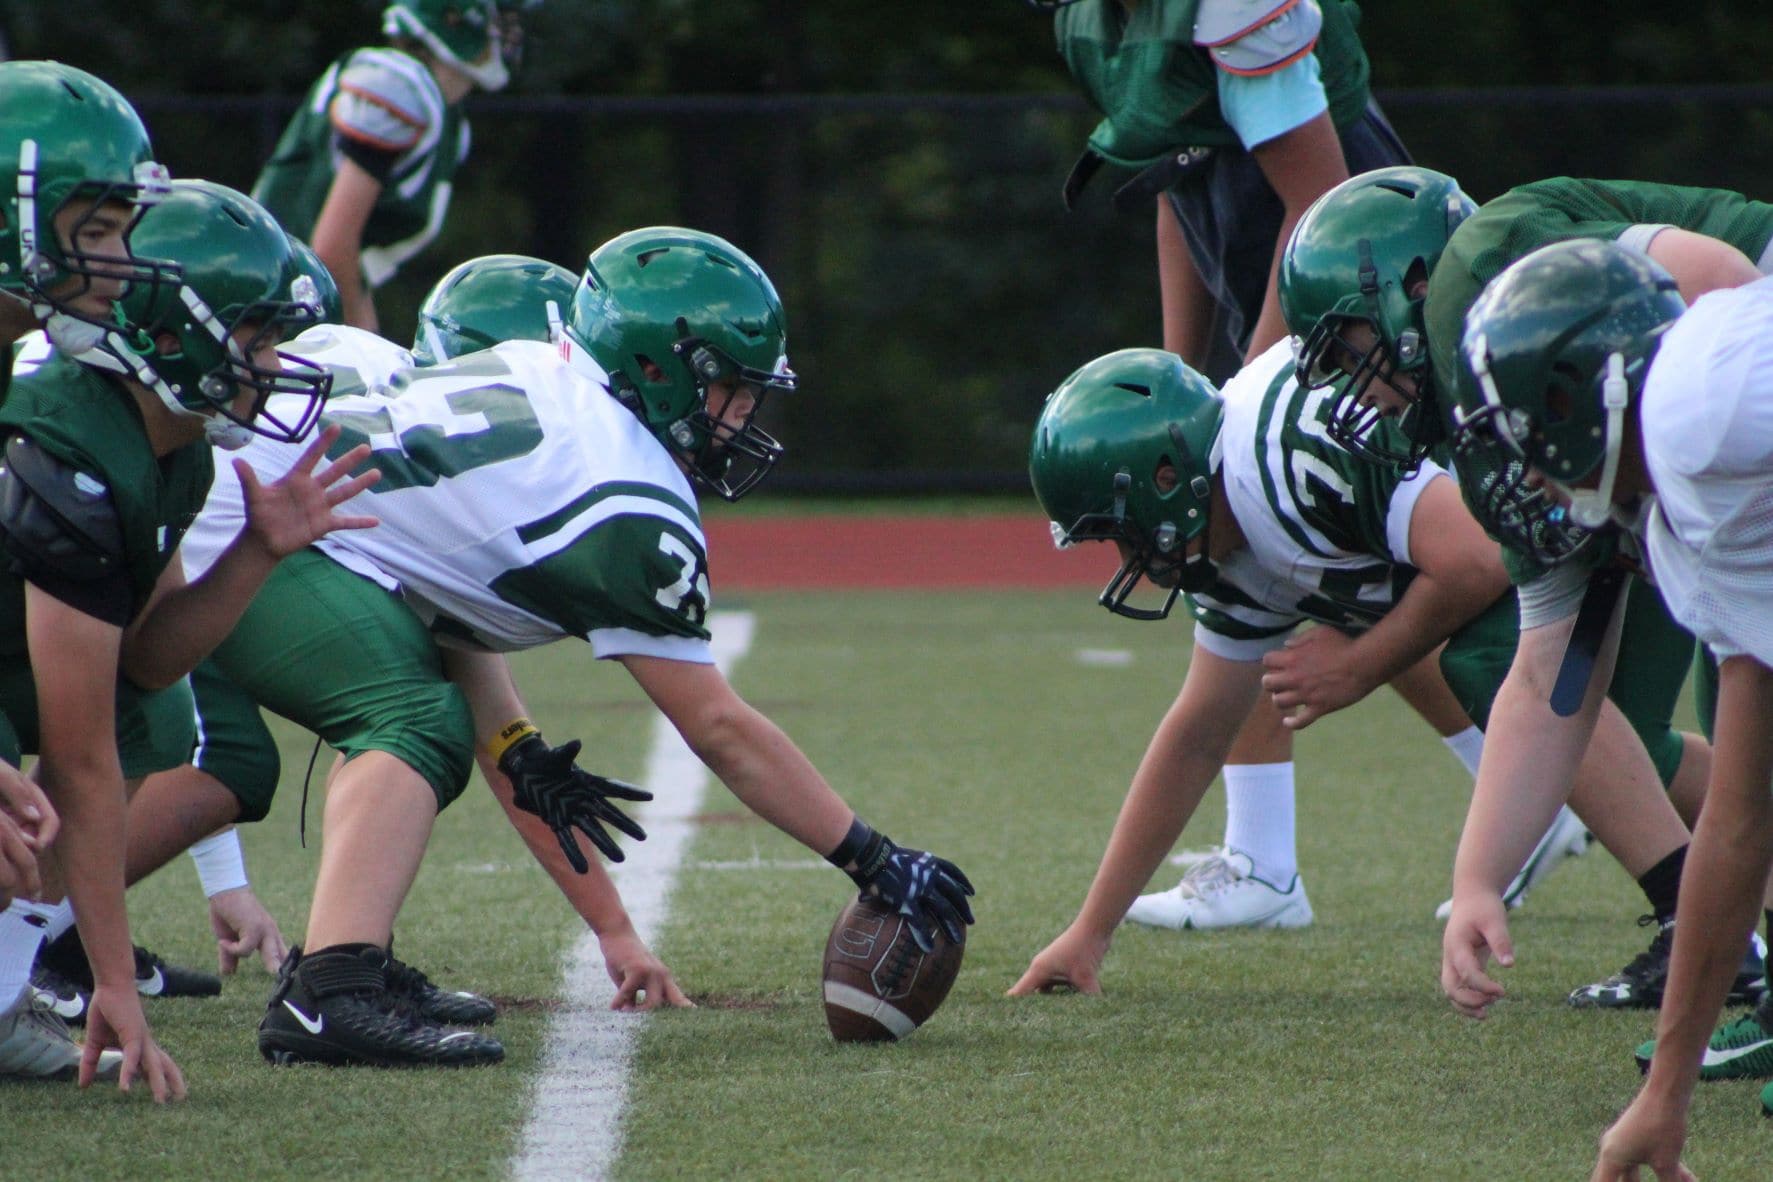 Grafton players line up to practice a play.